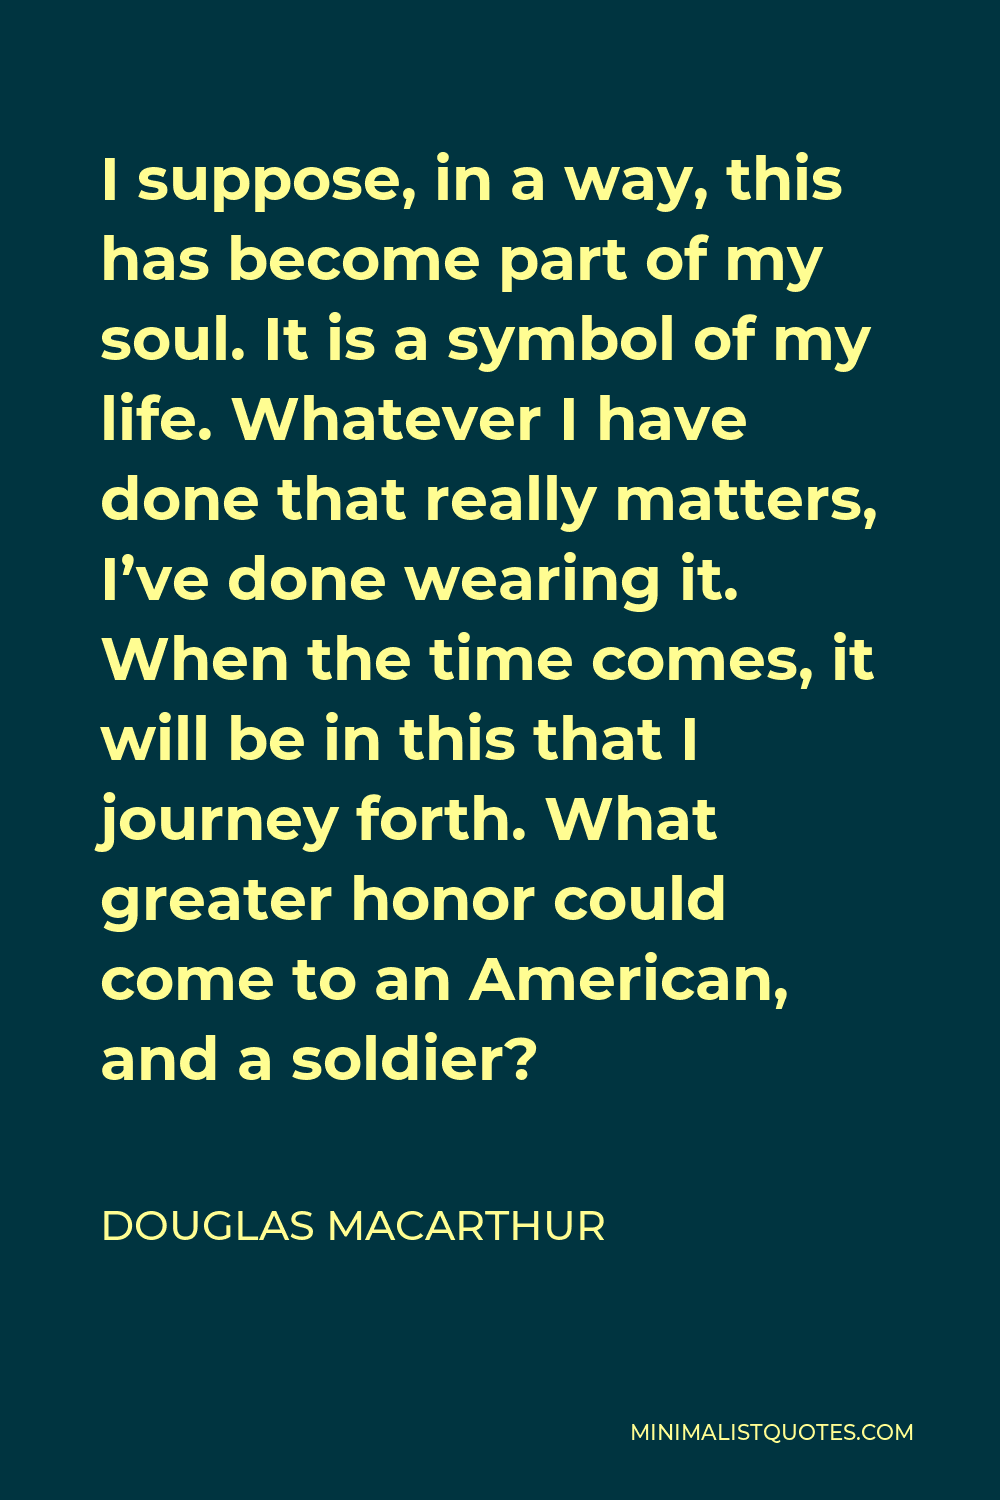 Douglas MacArthur Quote - I suppose, in a way, this has become part of my soul. It is a symbol of my life. Whatever I have done that really matters, I’ve done wearing it. When the time comes, it will be in this that I journey forth. What greater honor could come to an American, and a soldier?